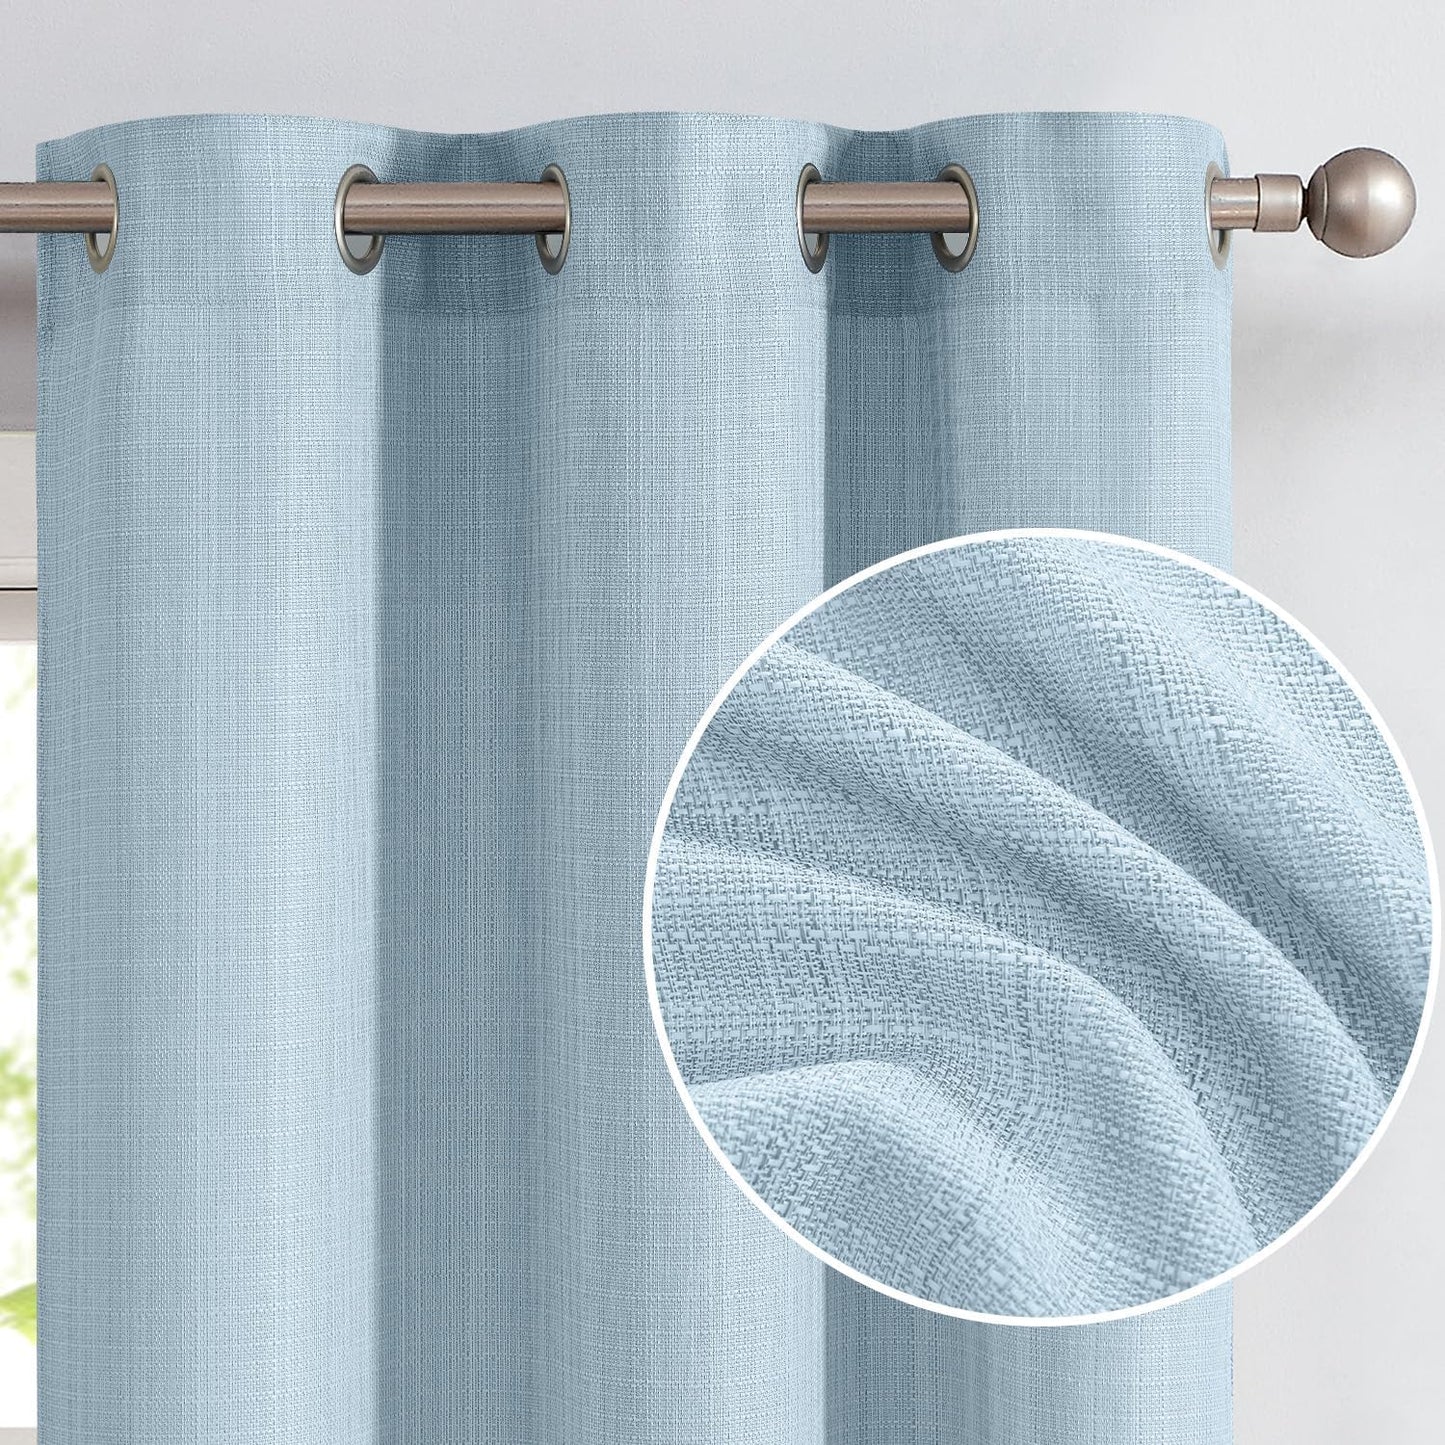 Jinchan Curtains for Bedroom Living Room 84 Inch Long Room Darkening Farmhouse Country Window Curtains Heathered Denim Blue Curtains Grommet Curtains Drapes 2 Panels  CKNY HOME FASHION Grommet Heathered Sky Blue 38"W X 96"L 